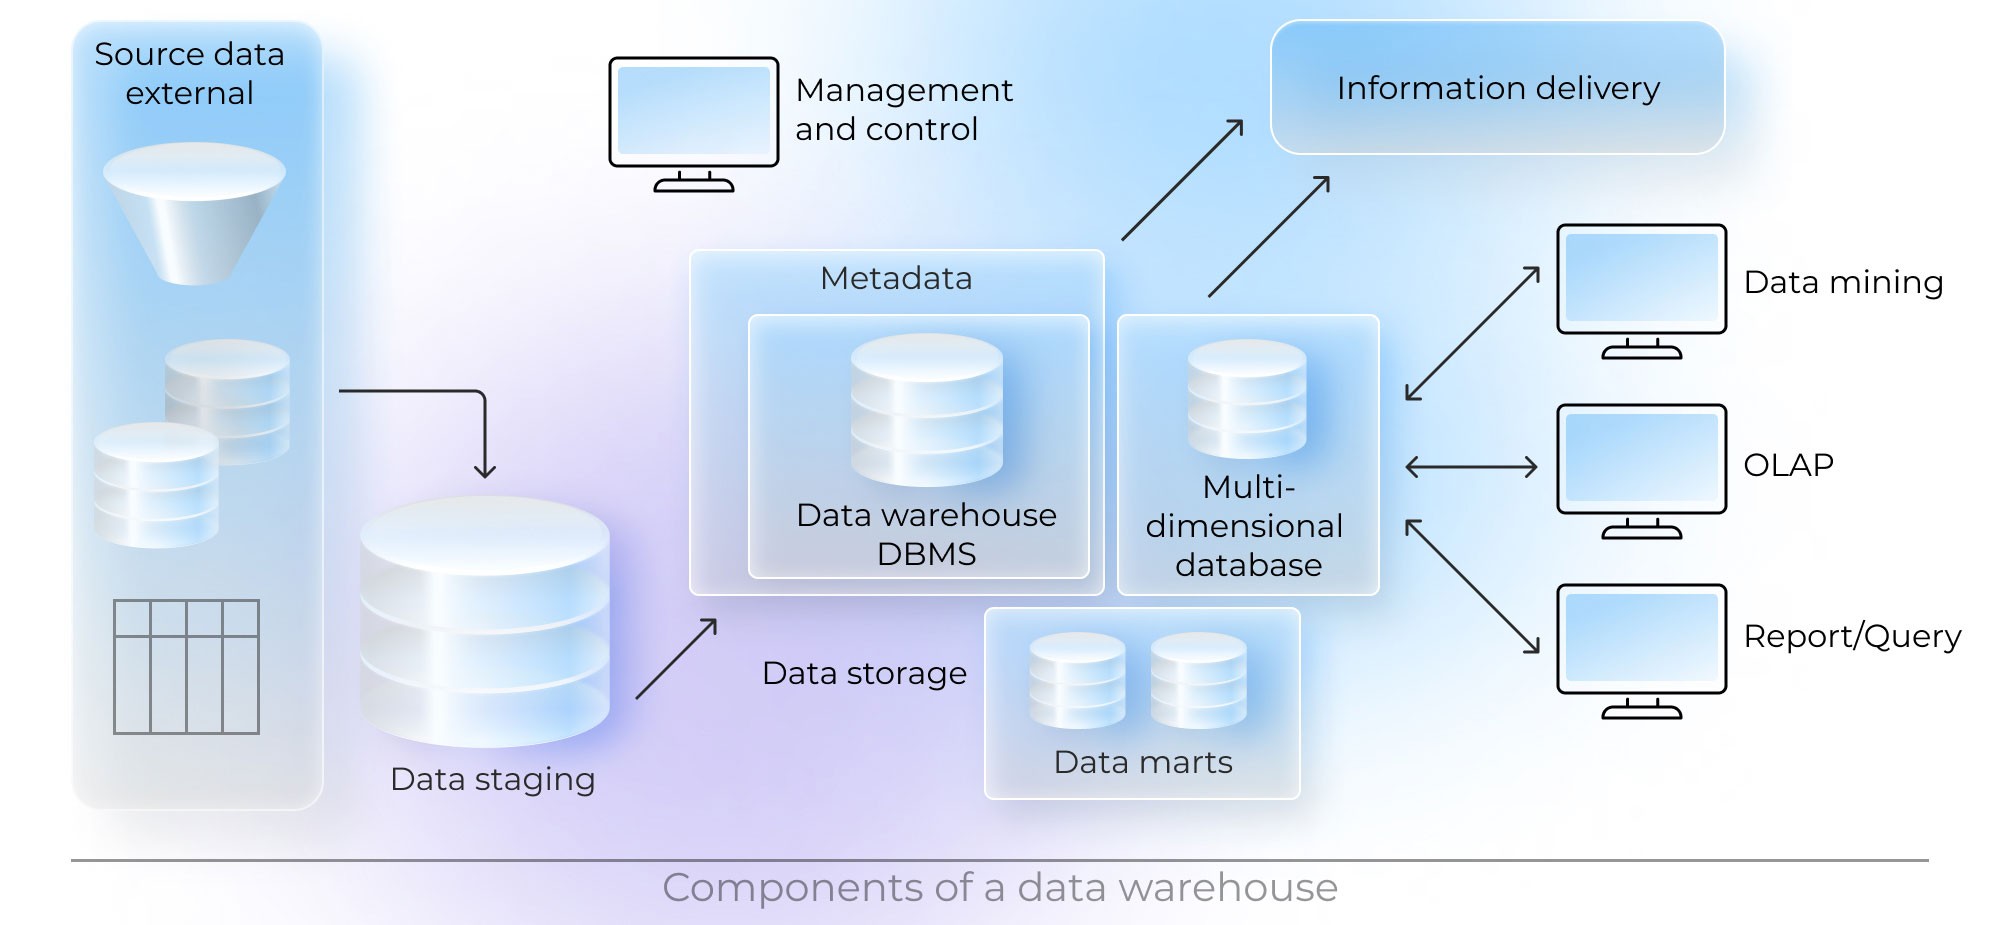 Components of a Data Warehouse